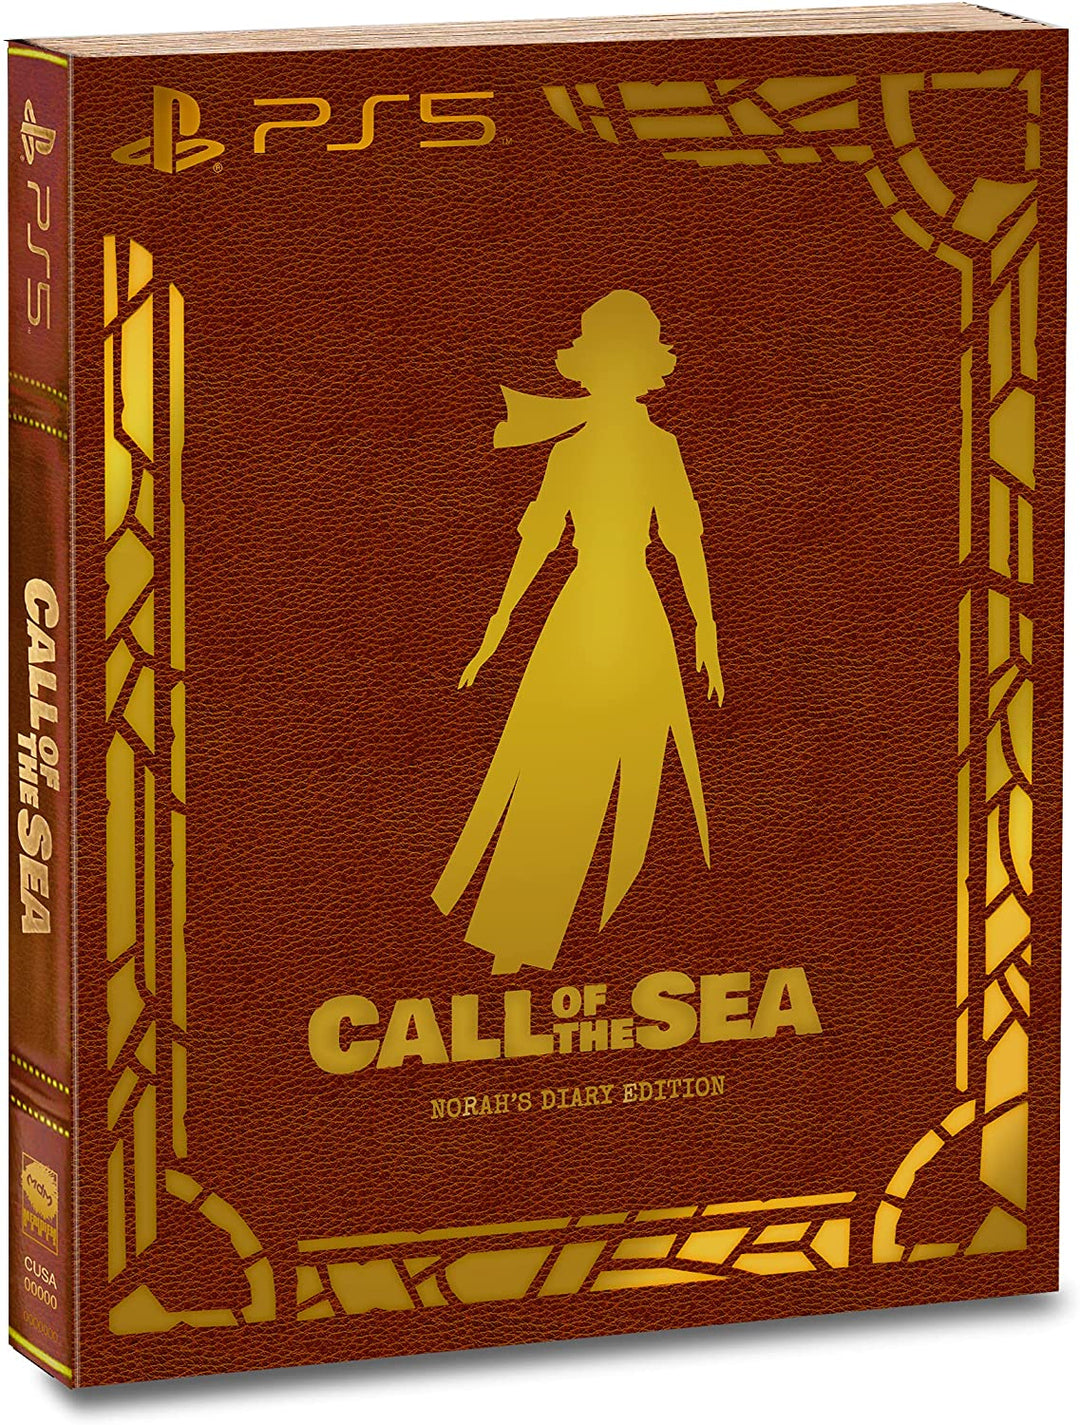 Call of the Sea - Norah's Diary Edition PS5 (PS5)